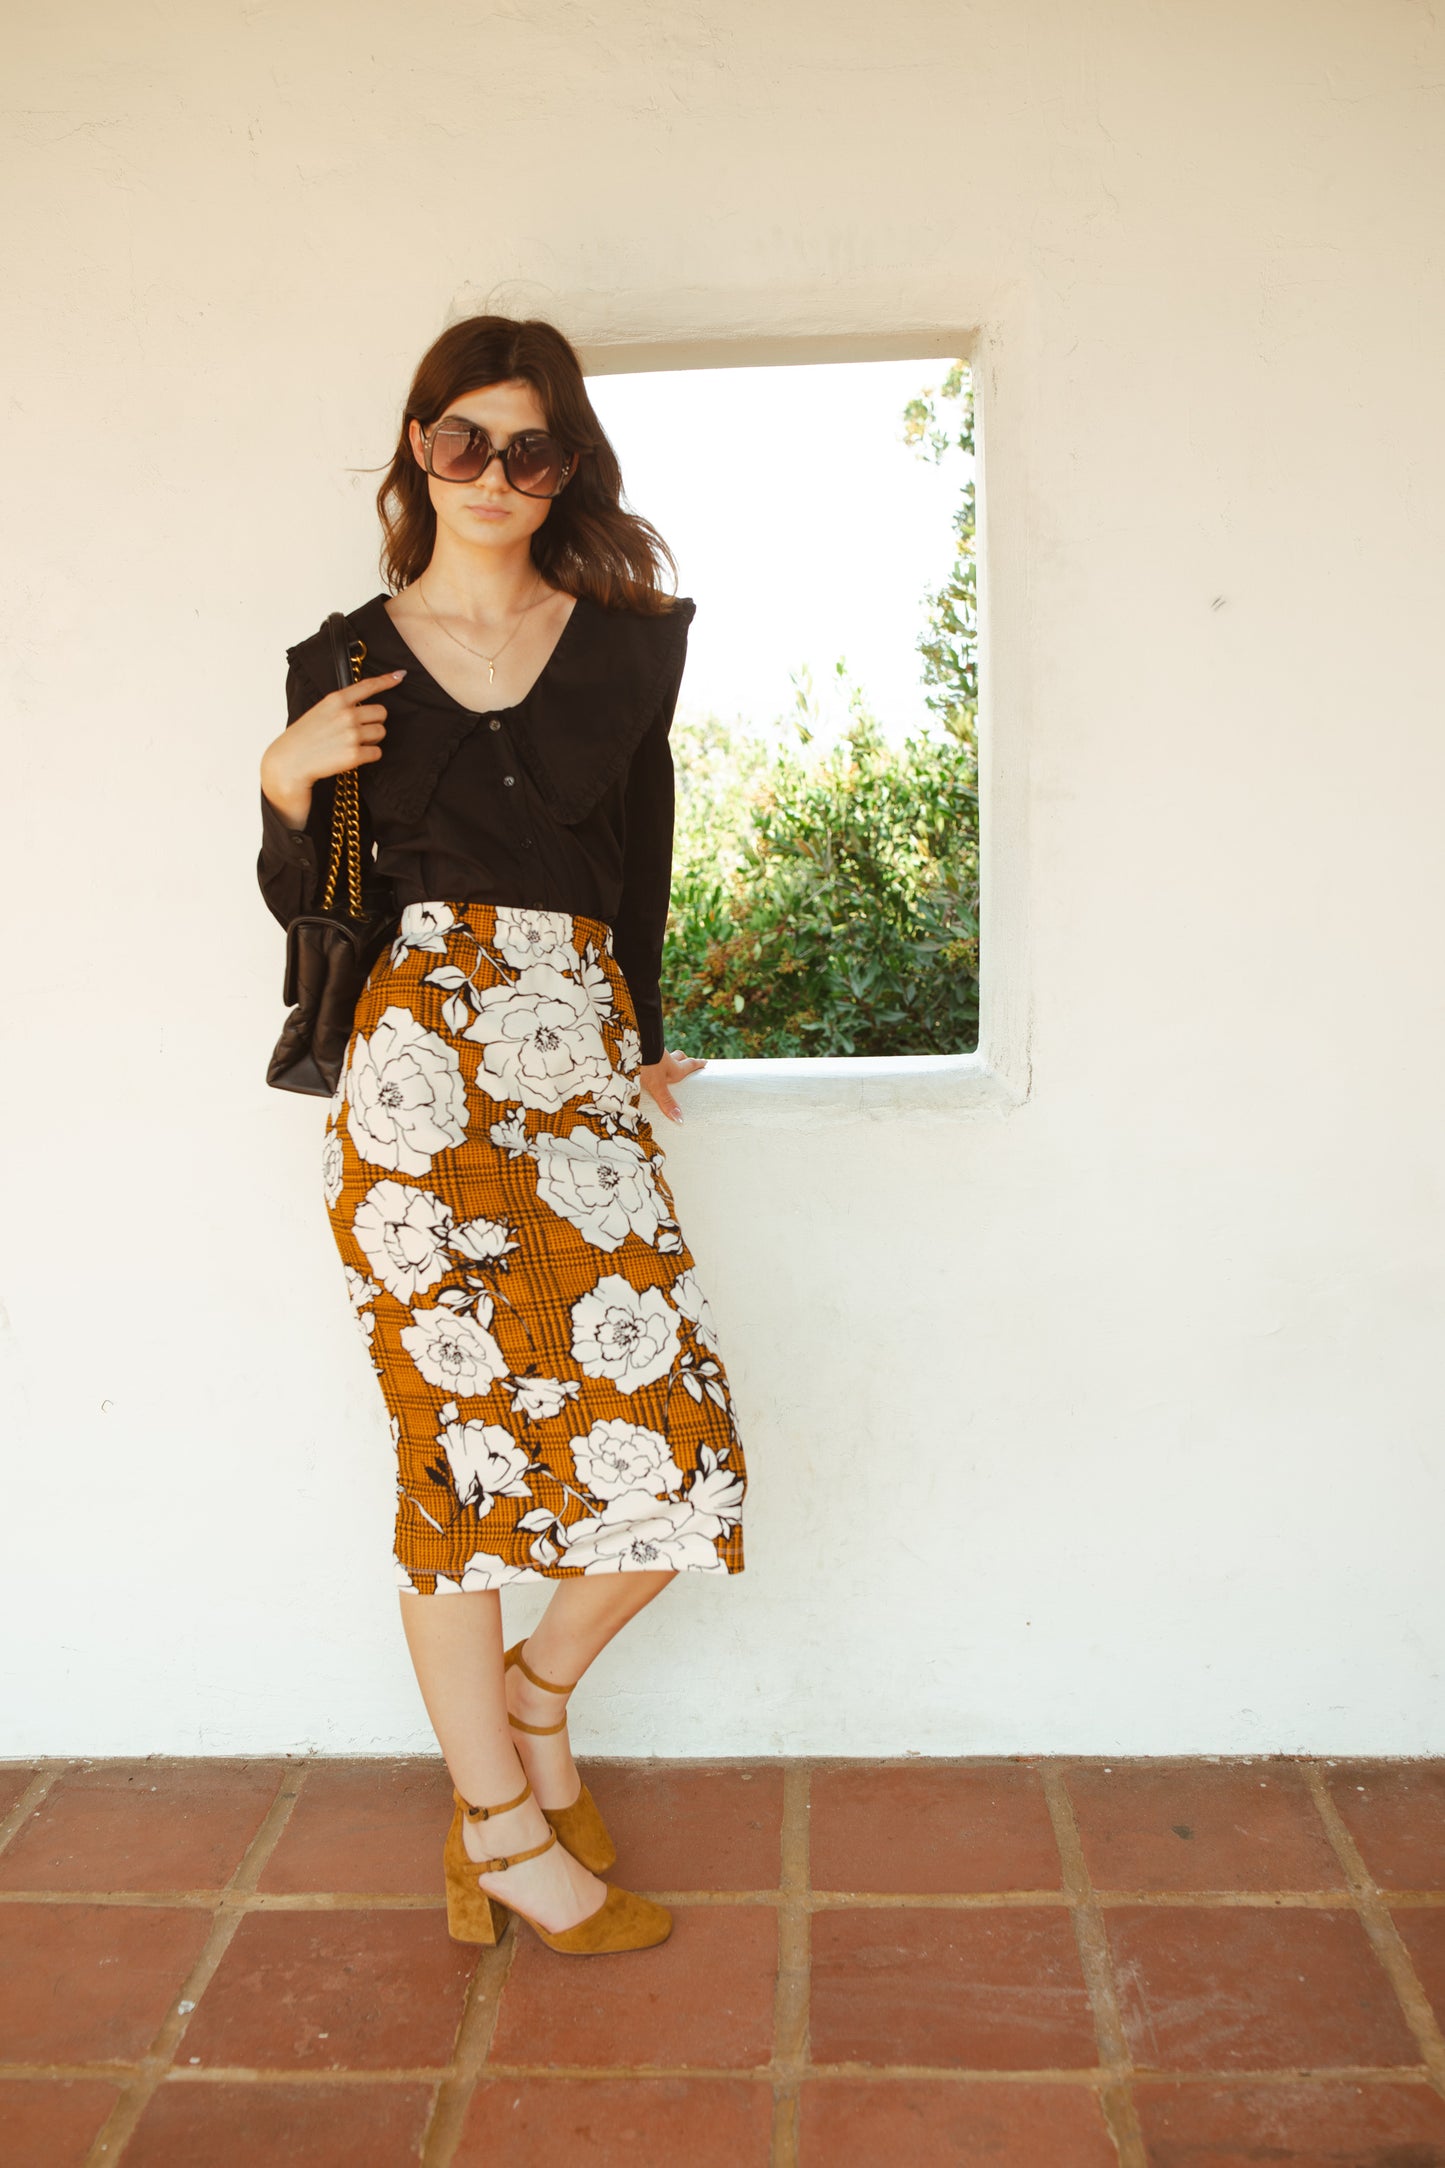 Cognac brown midi pencil skirt featuring black houndstooth pattern overlaid with large, modern, white and black floral print. This skirt is below the knee in length with an elastic waist for comfort. Bohemian floral meets dark academia in style.